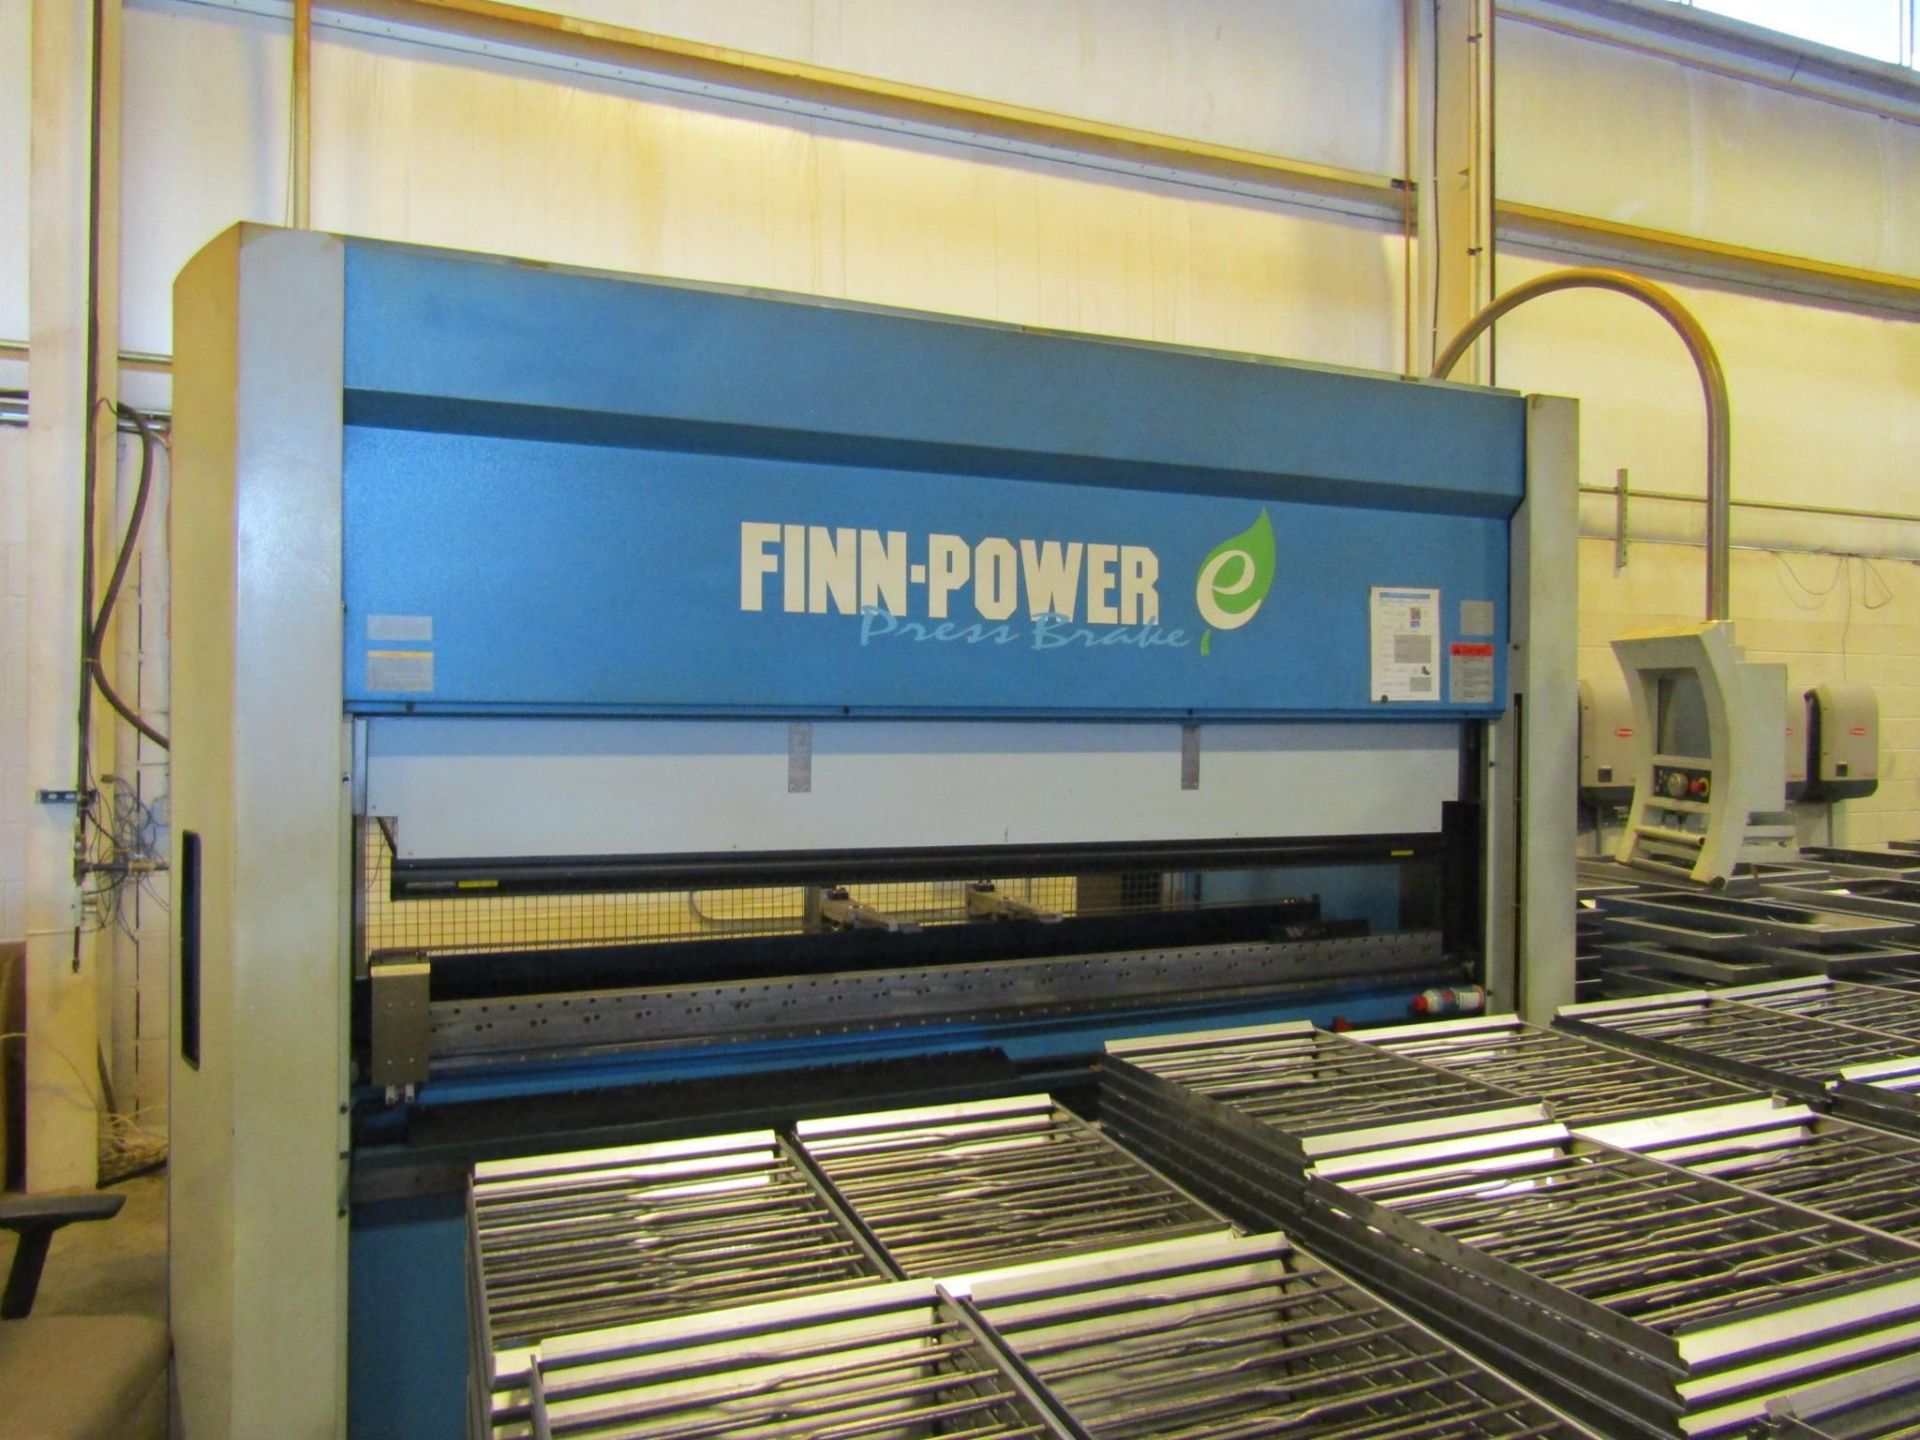 73T X 8' FINN-POWER E-SERIES 65-2550 ELECTRIC PRESS BRAKE, 2005 4 AXIS BACKGAUGE (HAS KNOWN ISSUES)